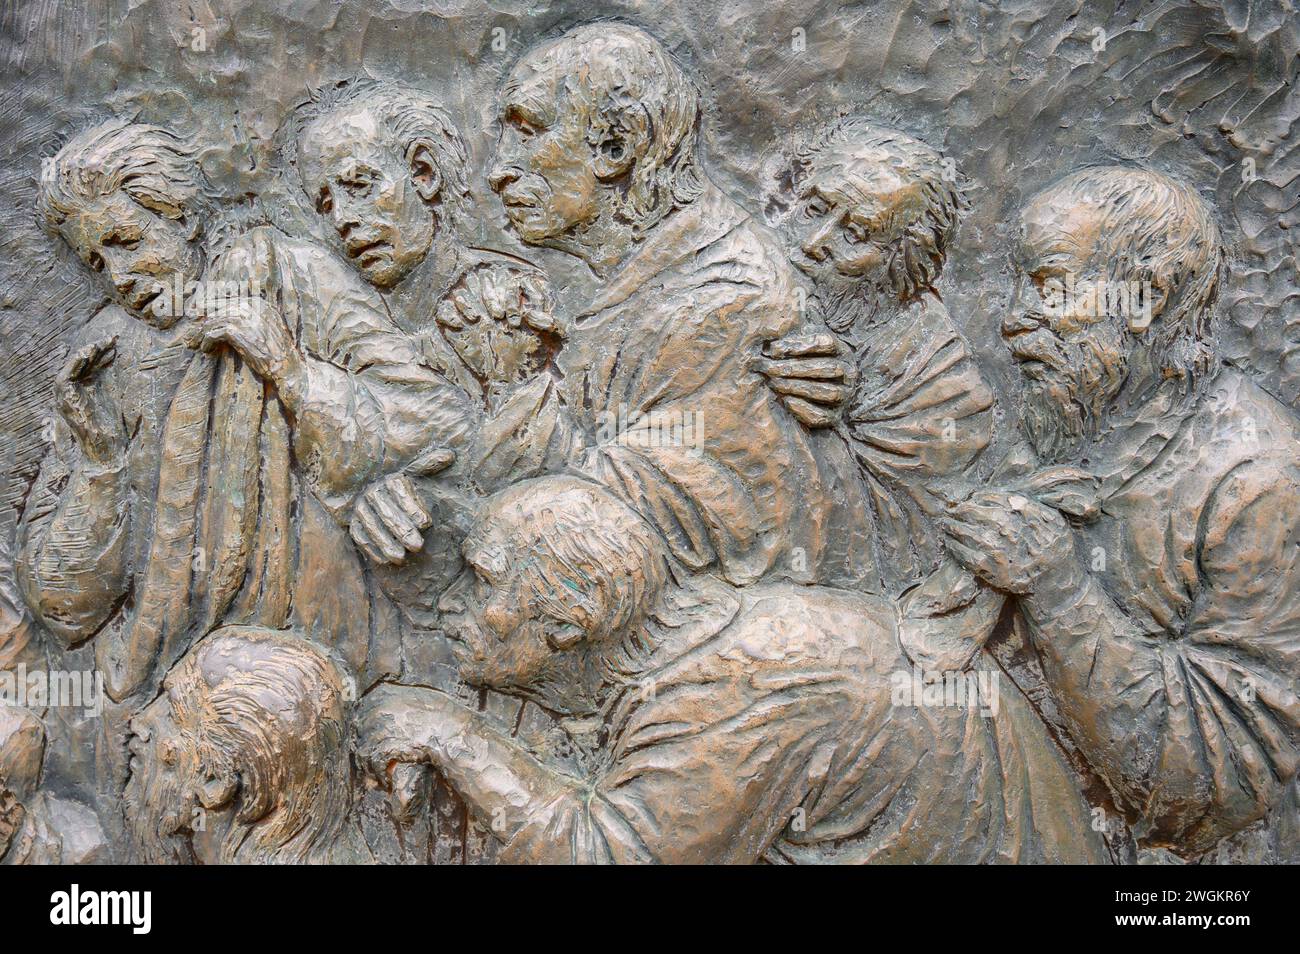 The Nativity of Jesus – Third Joyful Mystery of the Rosary. A relief sculpture on Mount Podbrdo (the Hill of Apparitions) in Medjugorje. Stock Photo